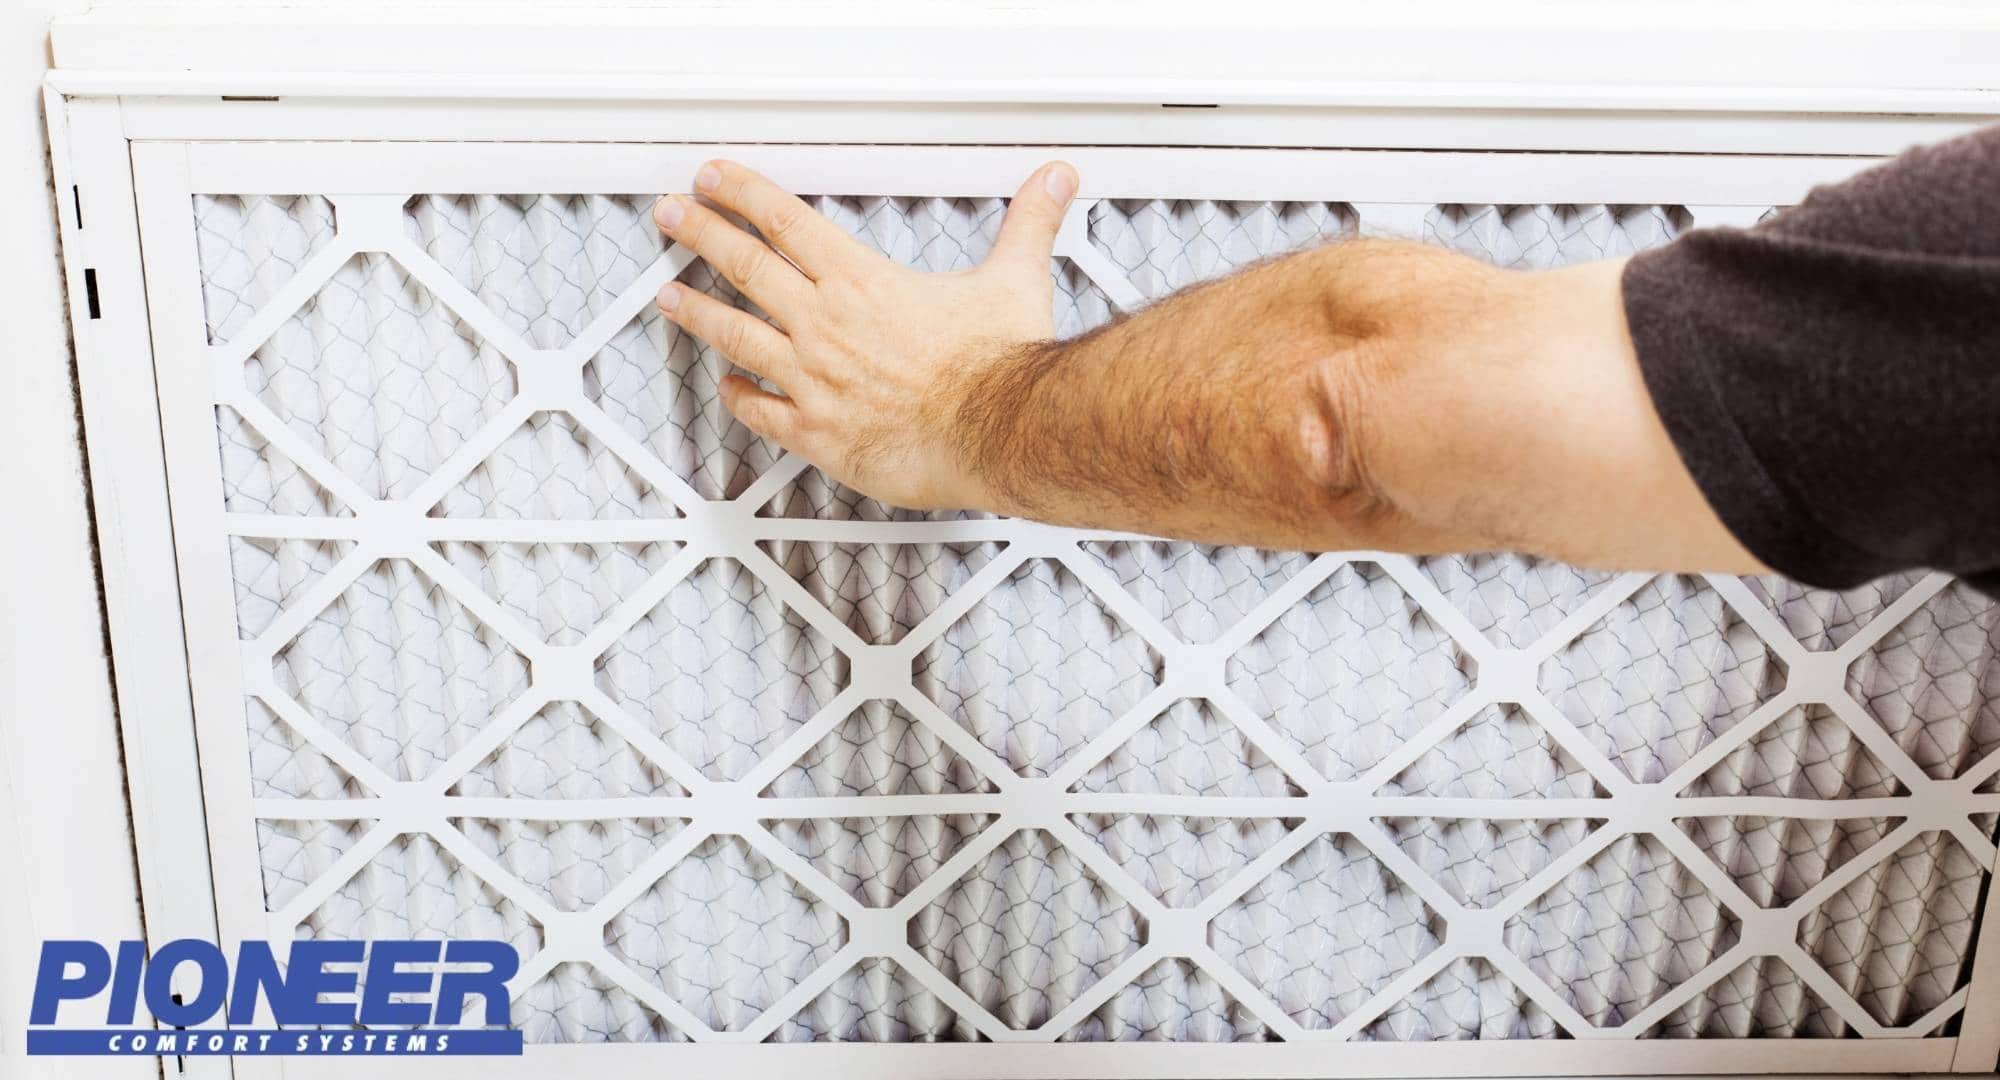 Shreveport Air Conditioning Services